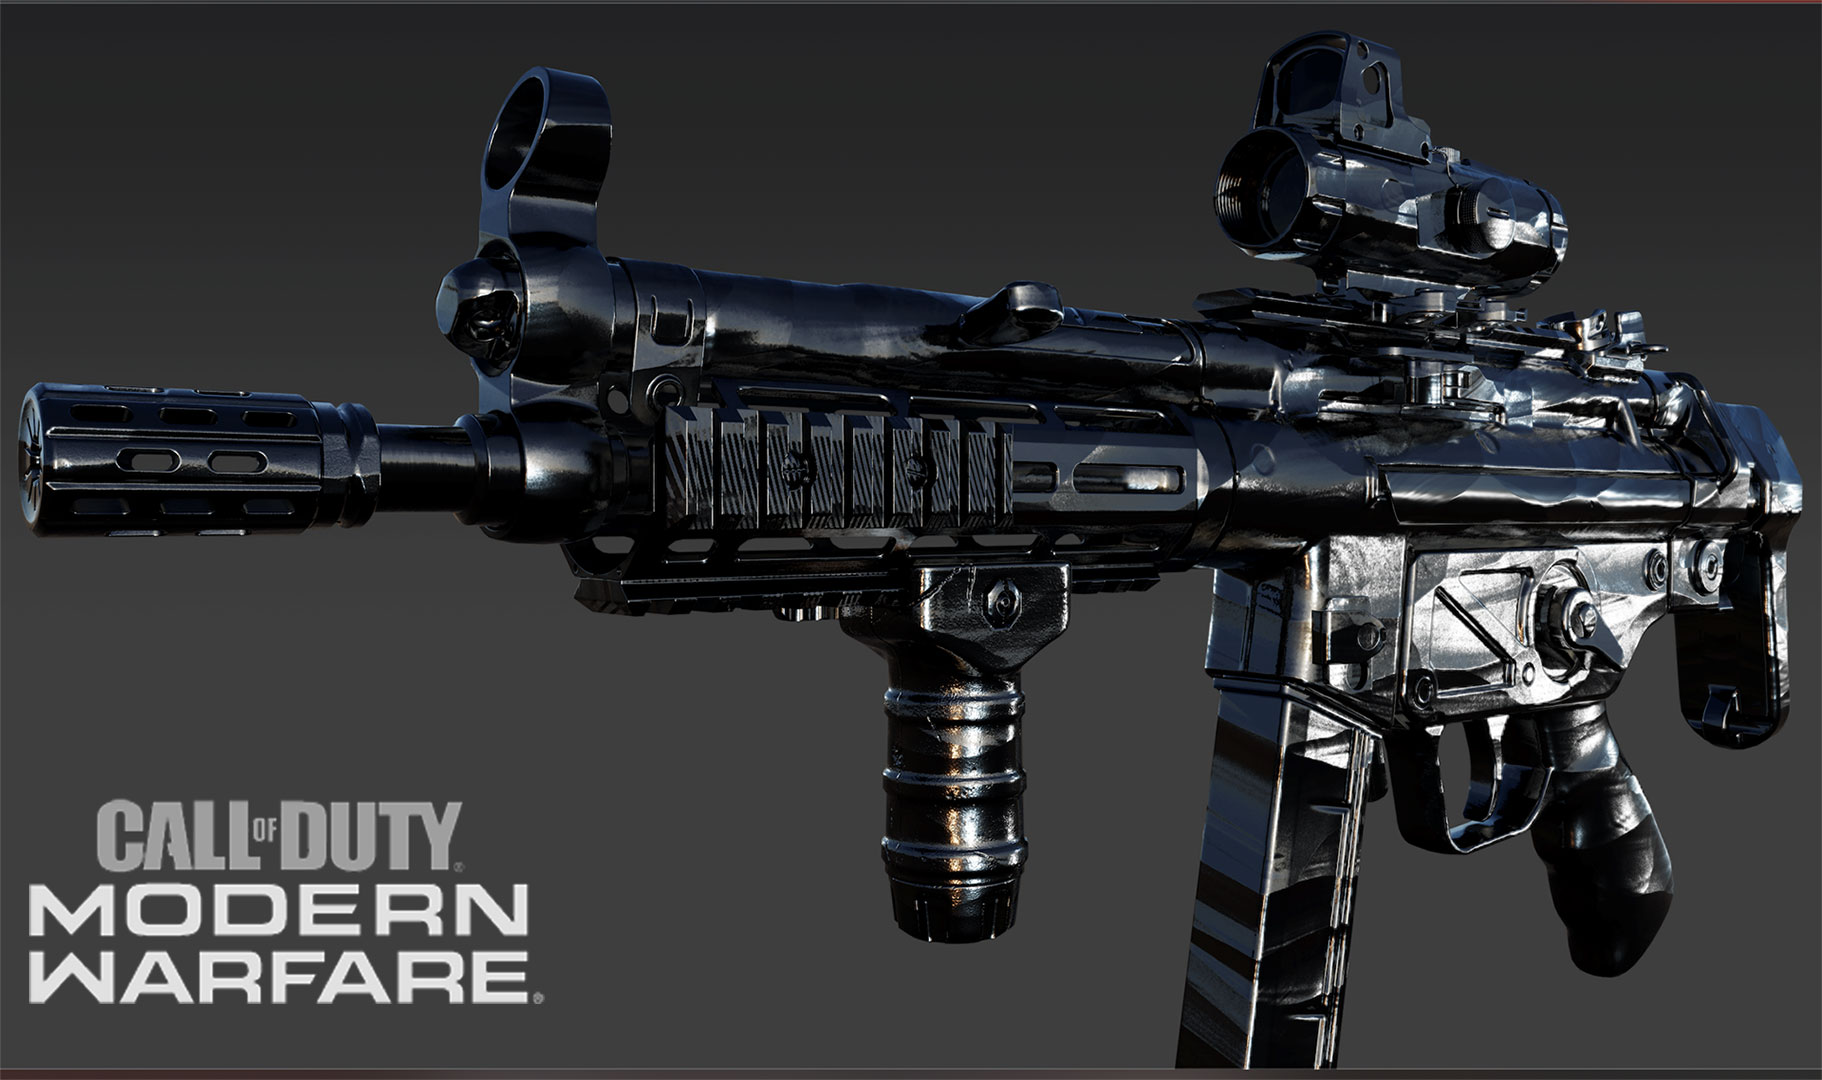 Become A True Weapon Master With Obsidian Camo Now In Call Of Duty Modern Warfare - roblox base wars hiw get kills fast